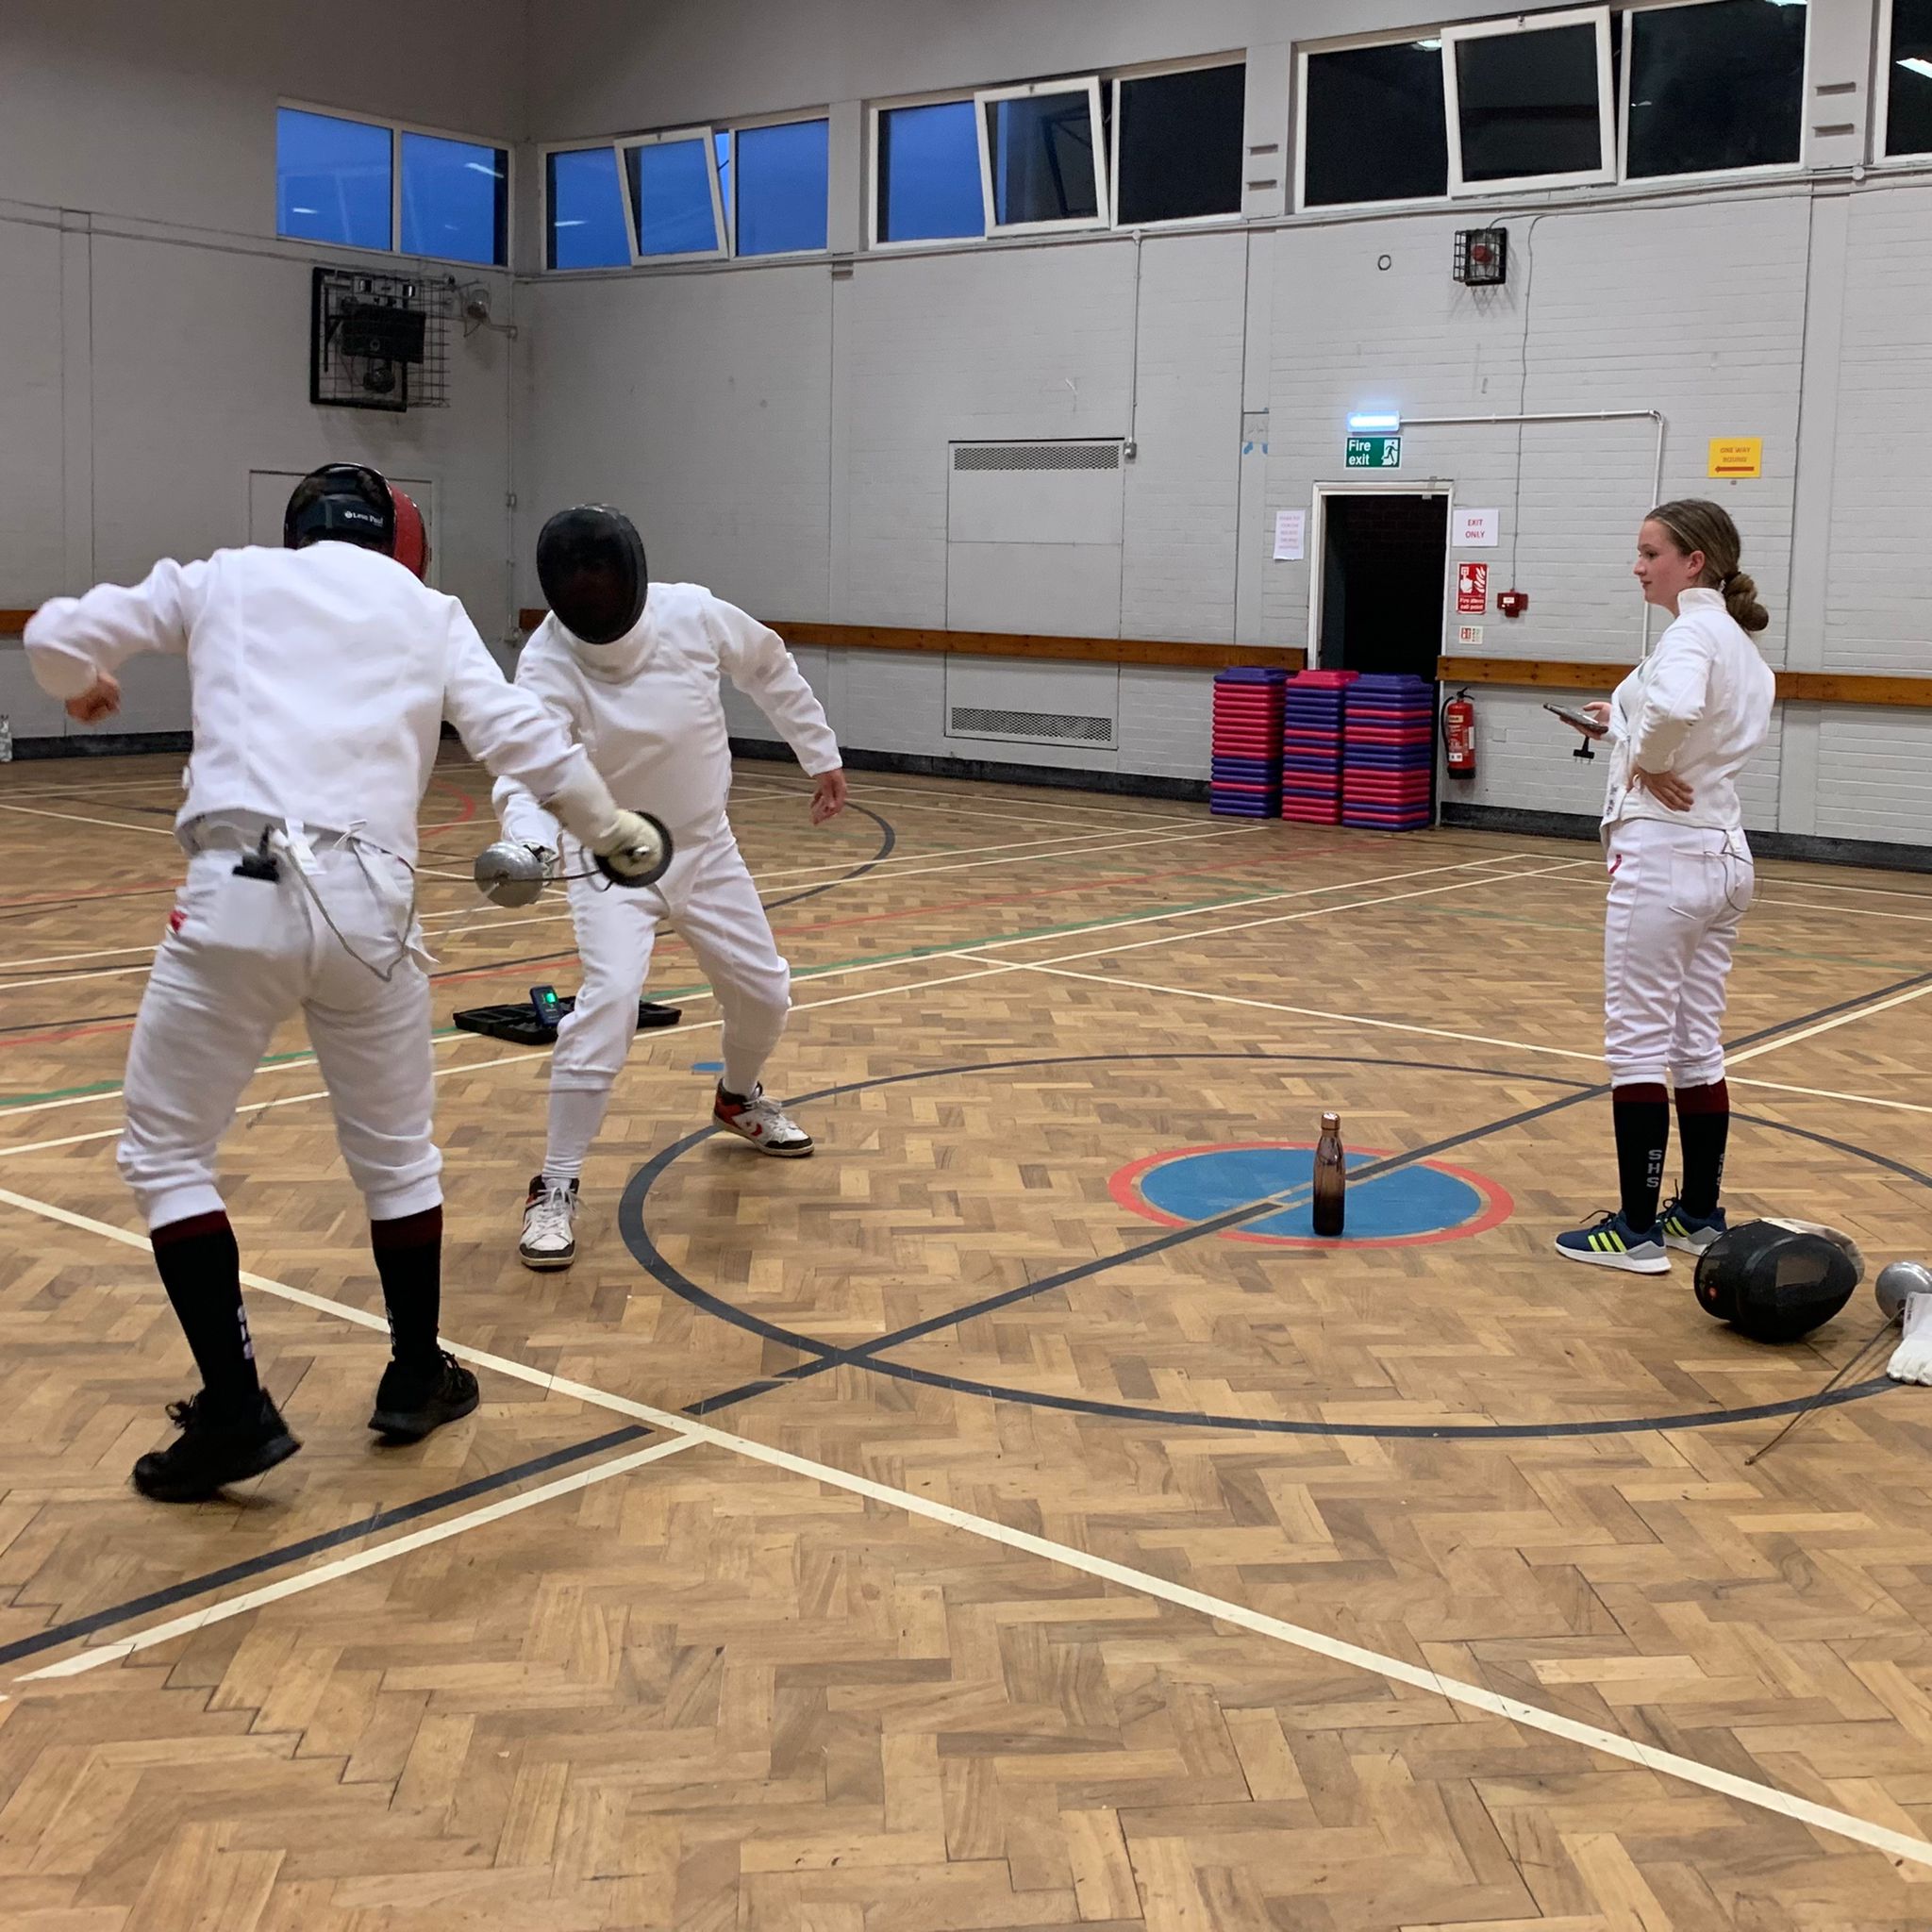 Fencing at the YMCA